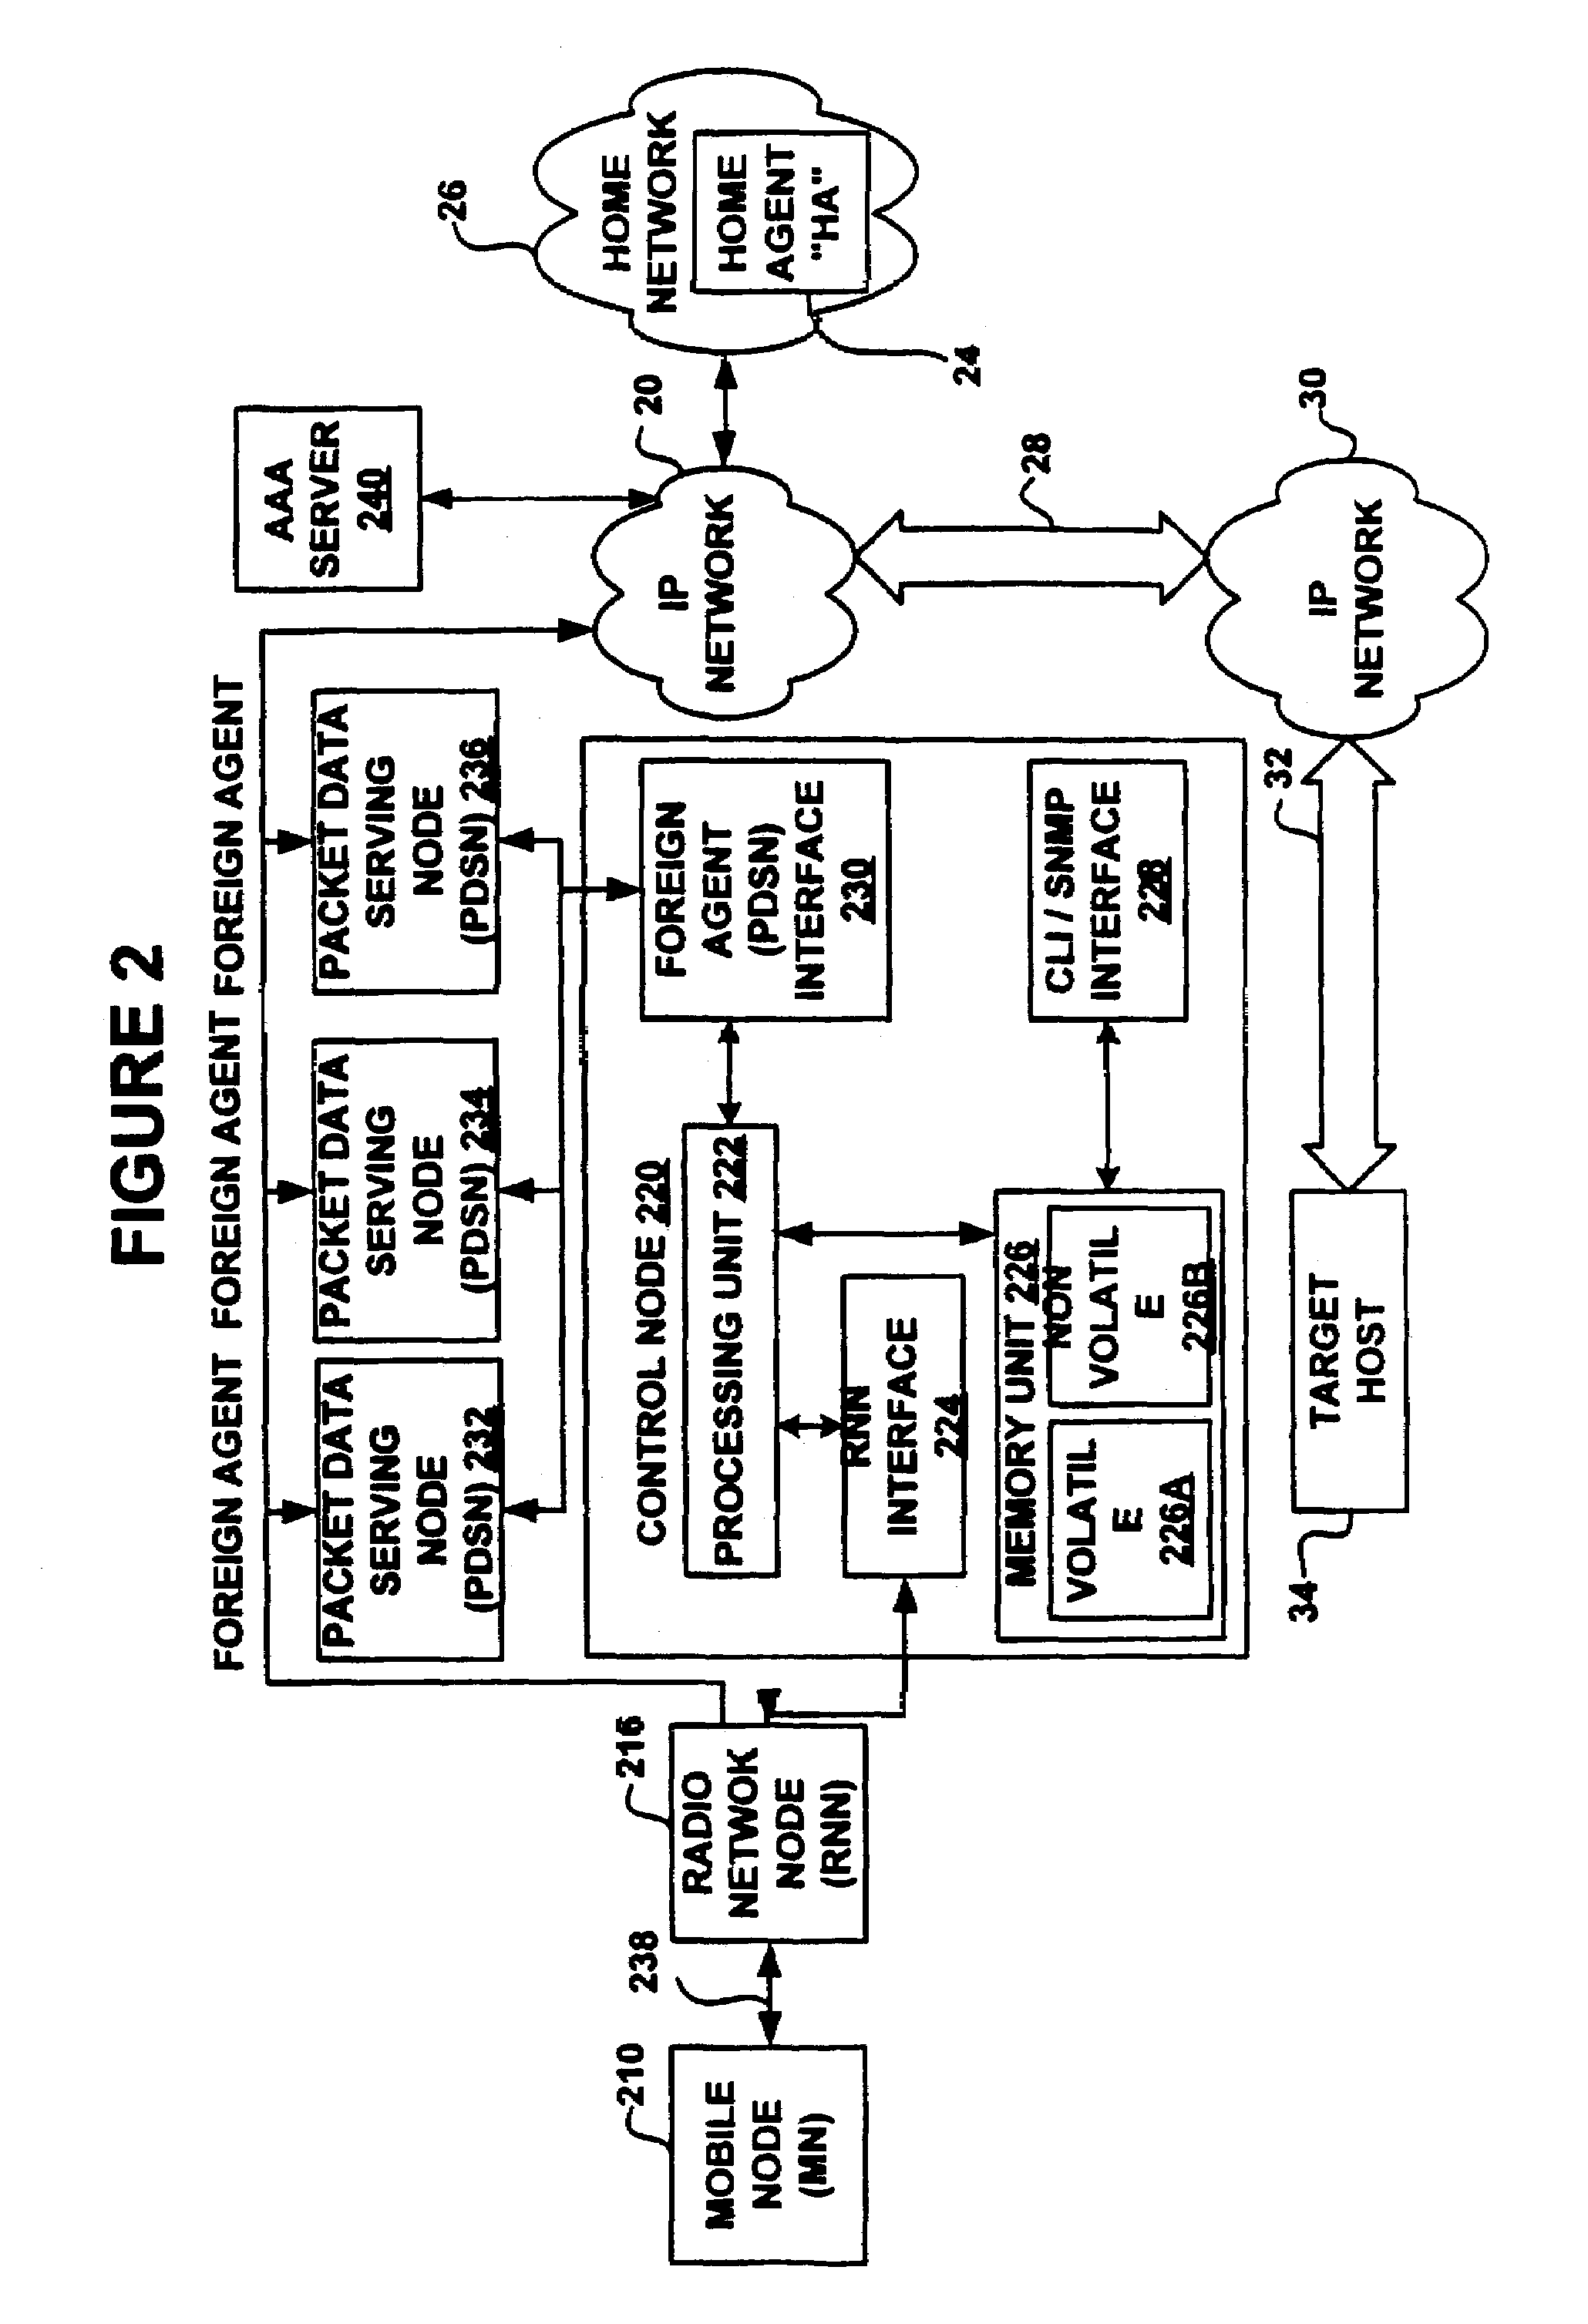 System and method for control of packet data serving node selection in a mobile internet protocol network